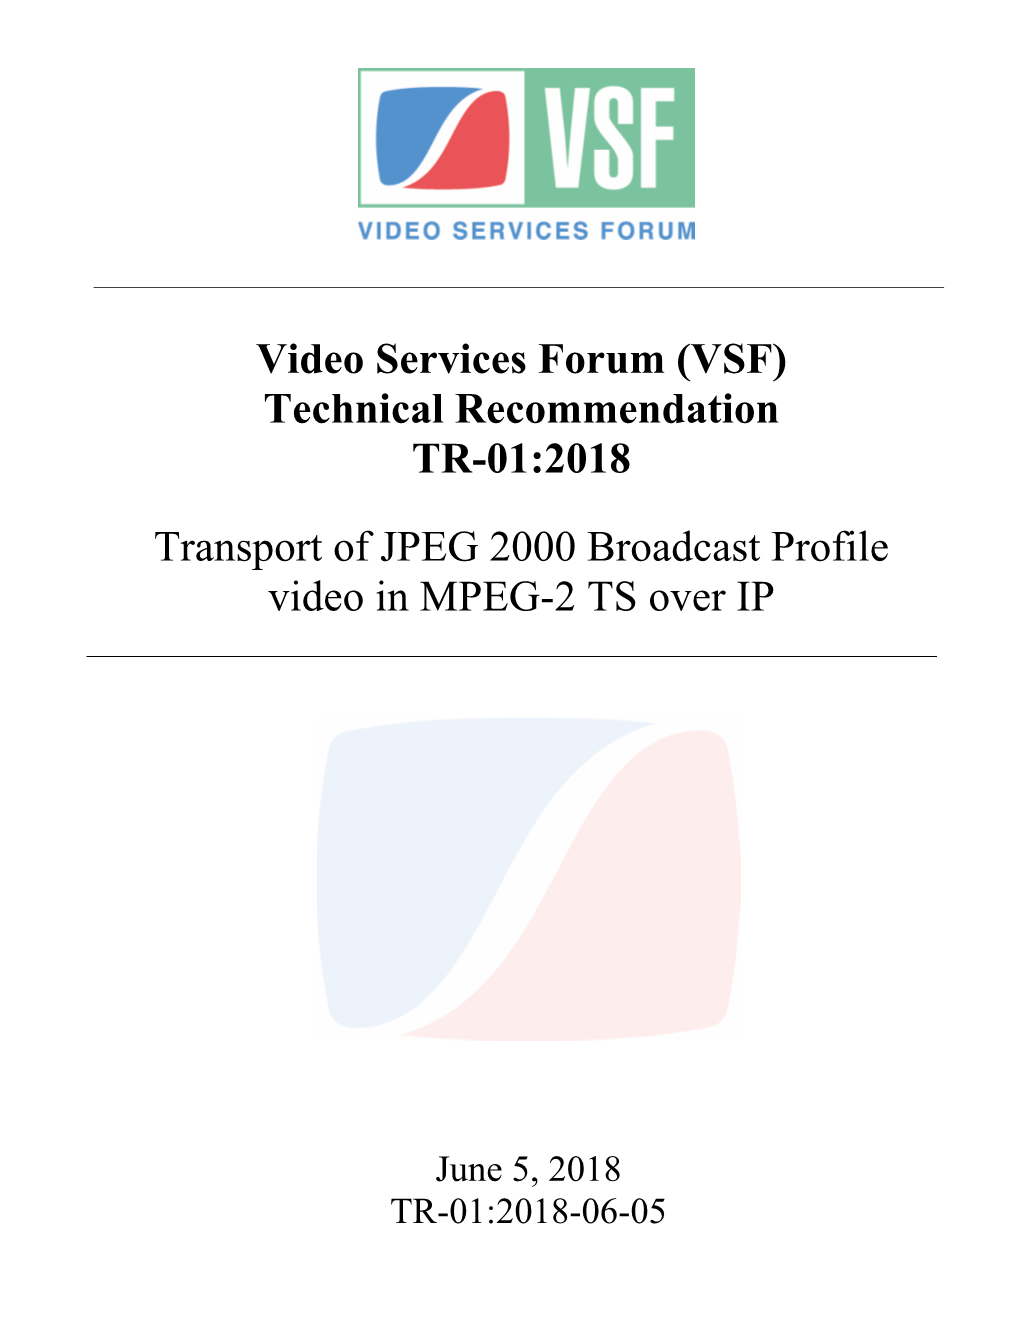 (VSF) Technical Recommendation TR-01:2018 Transport of JPEG